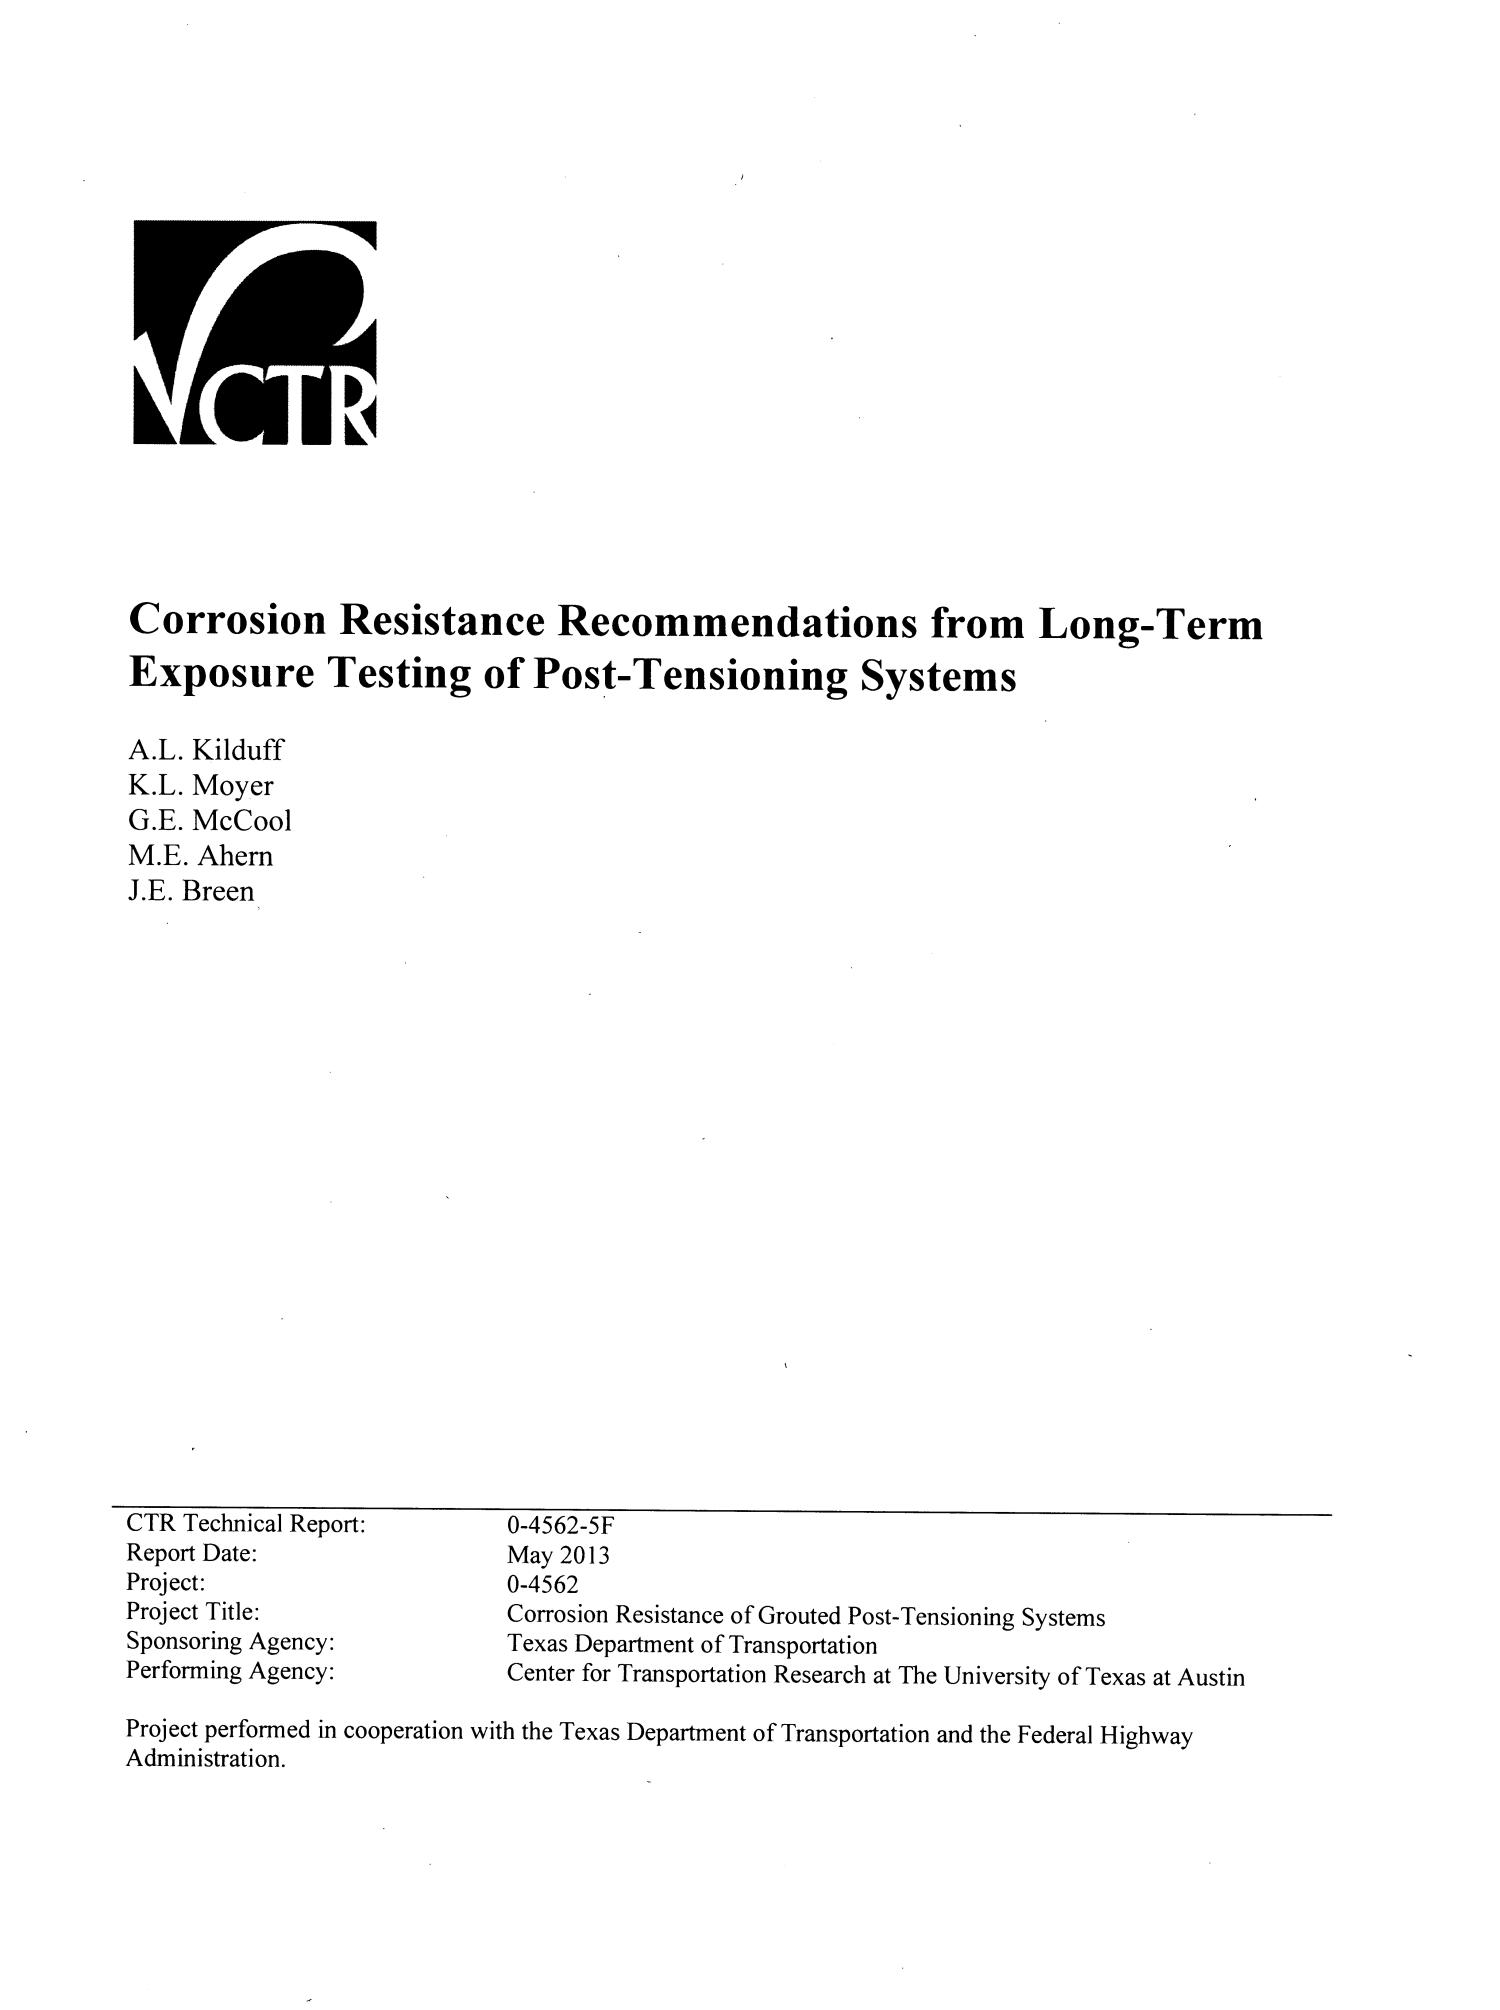 Corrosion Resistance Recommendations from Long-Term Exposure Testing of Post-Tensioning Systems
                                                
                                                    III
                                                